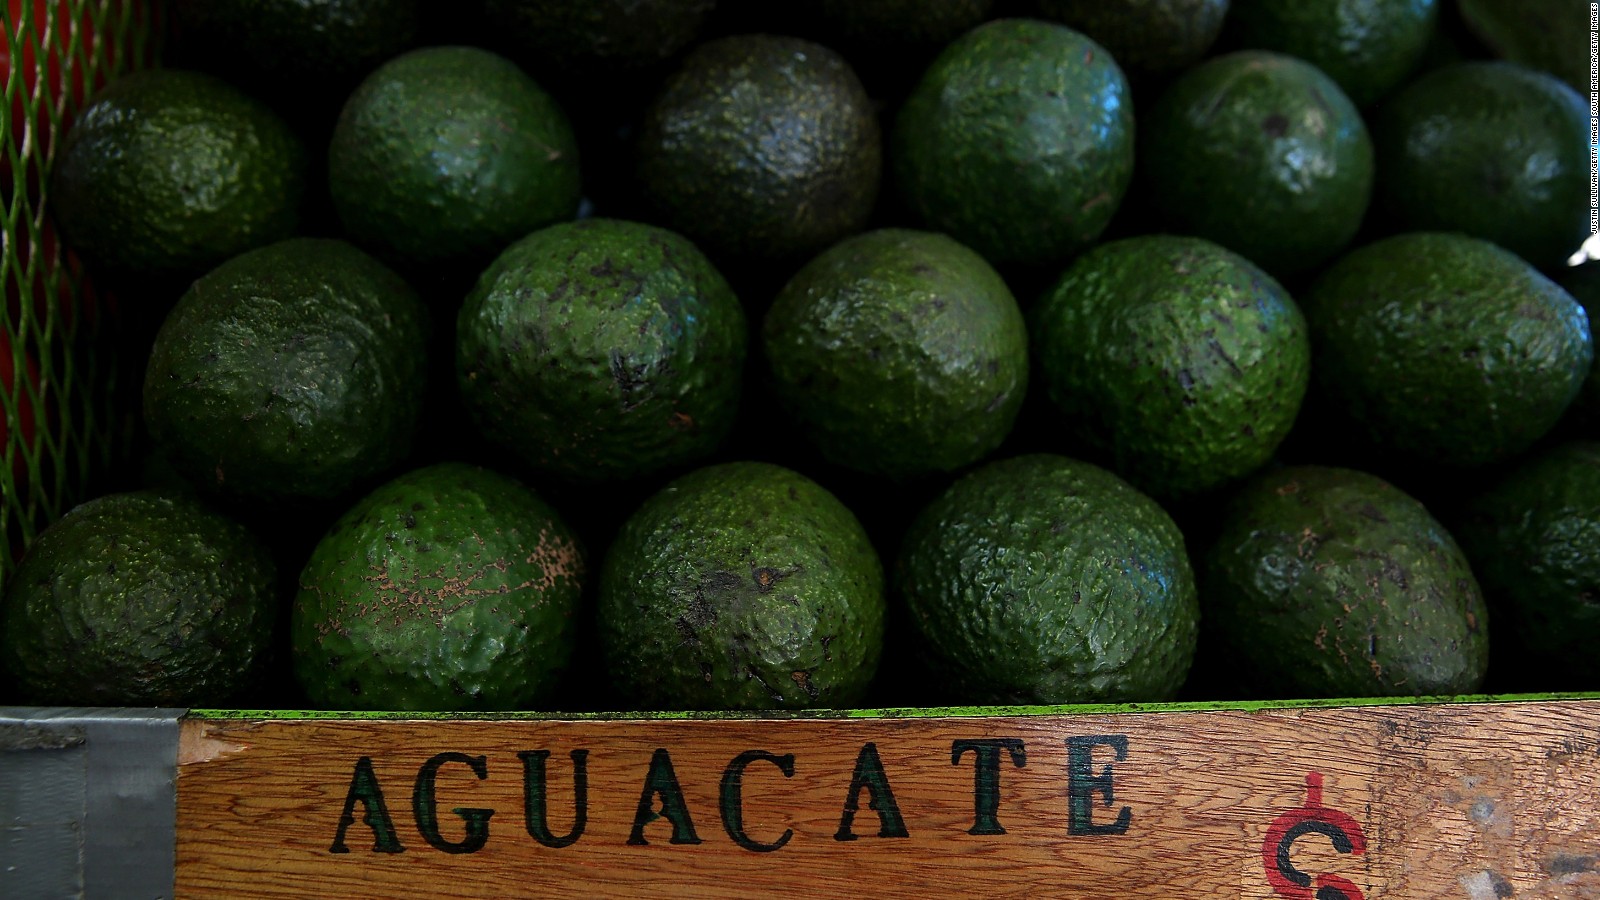 The price of avocados continue to rise